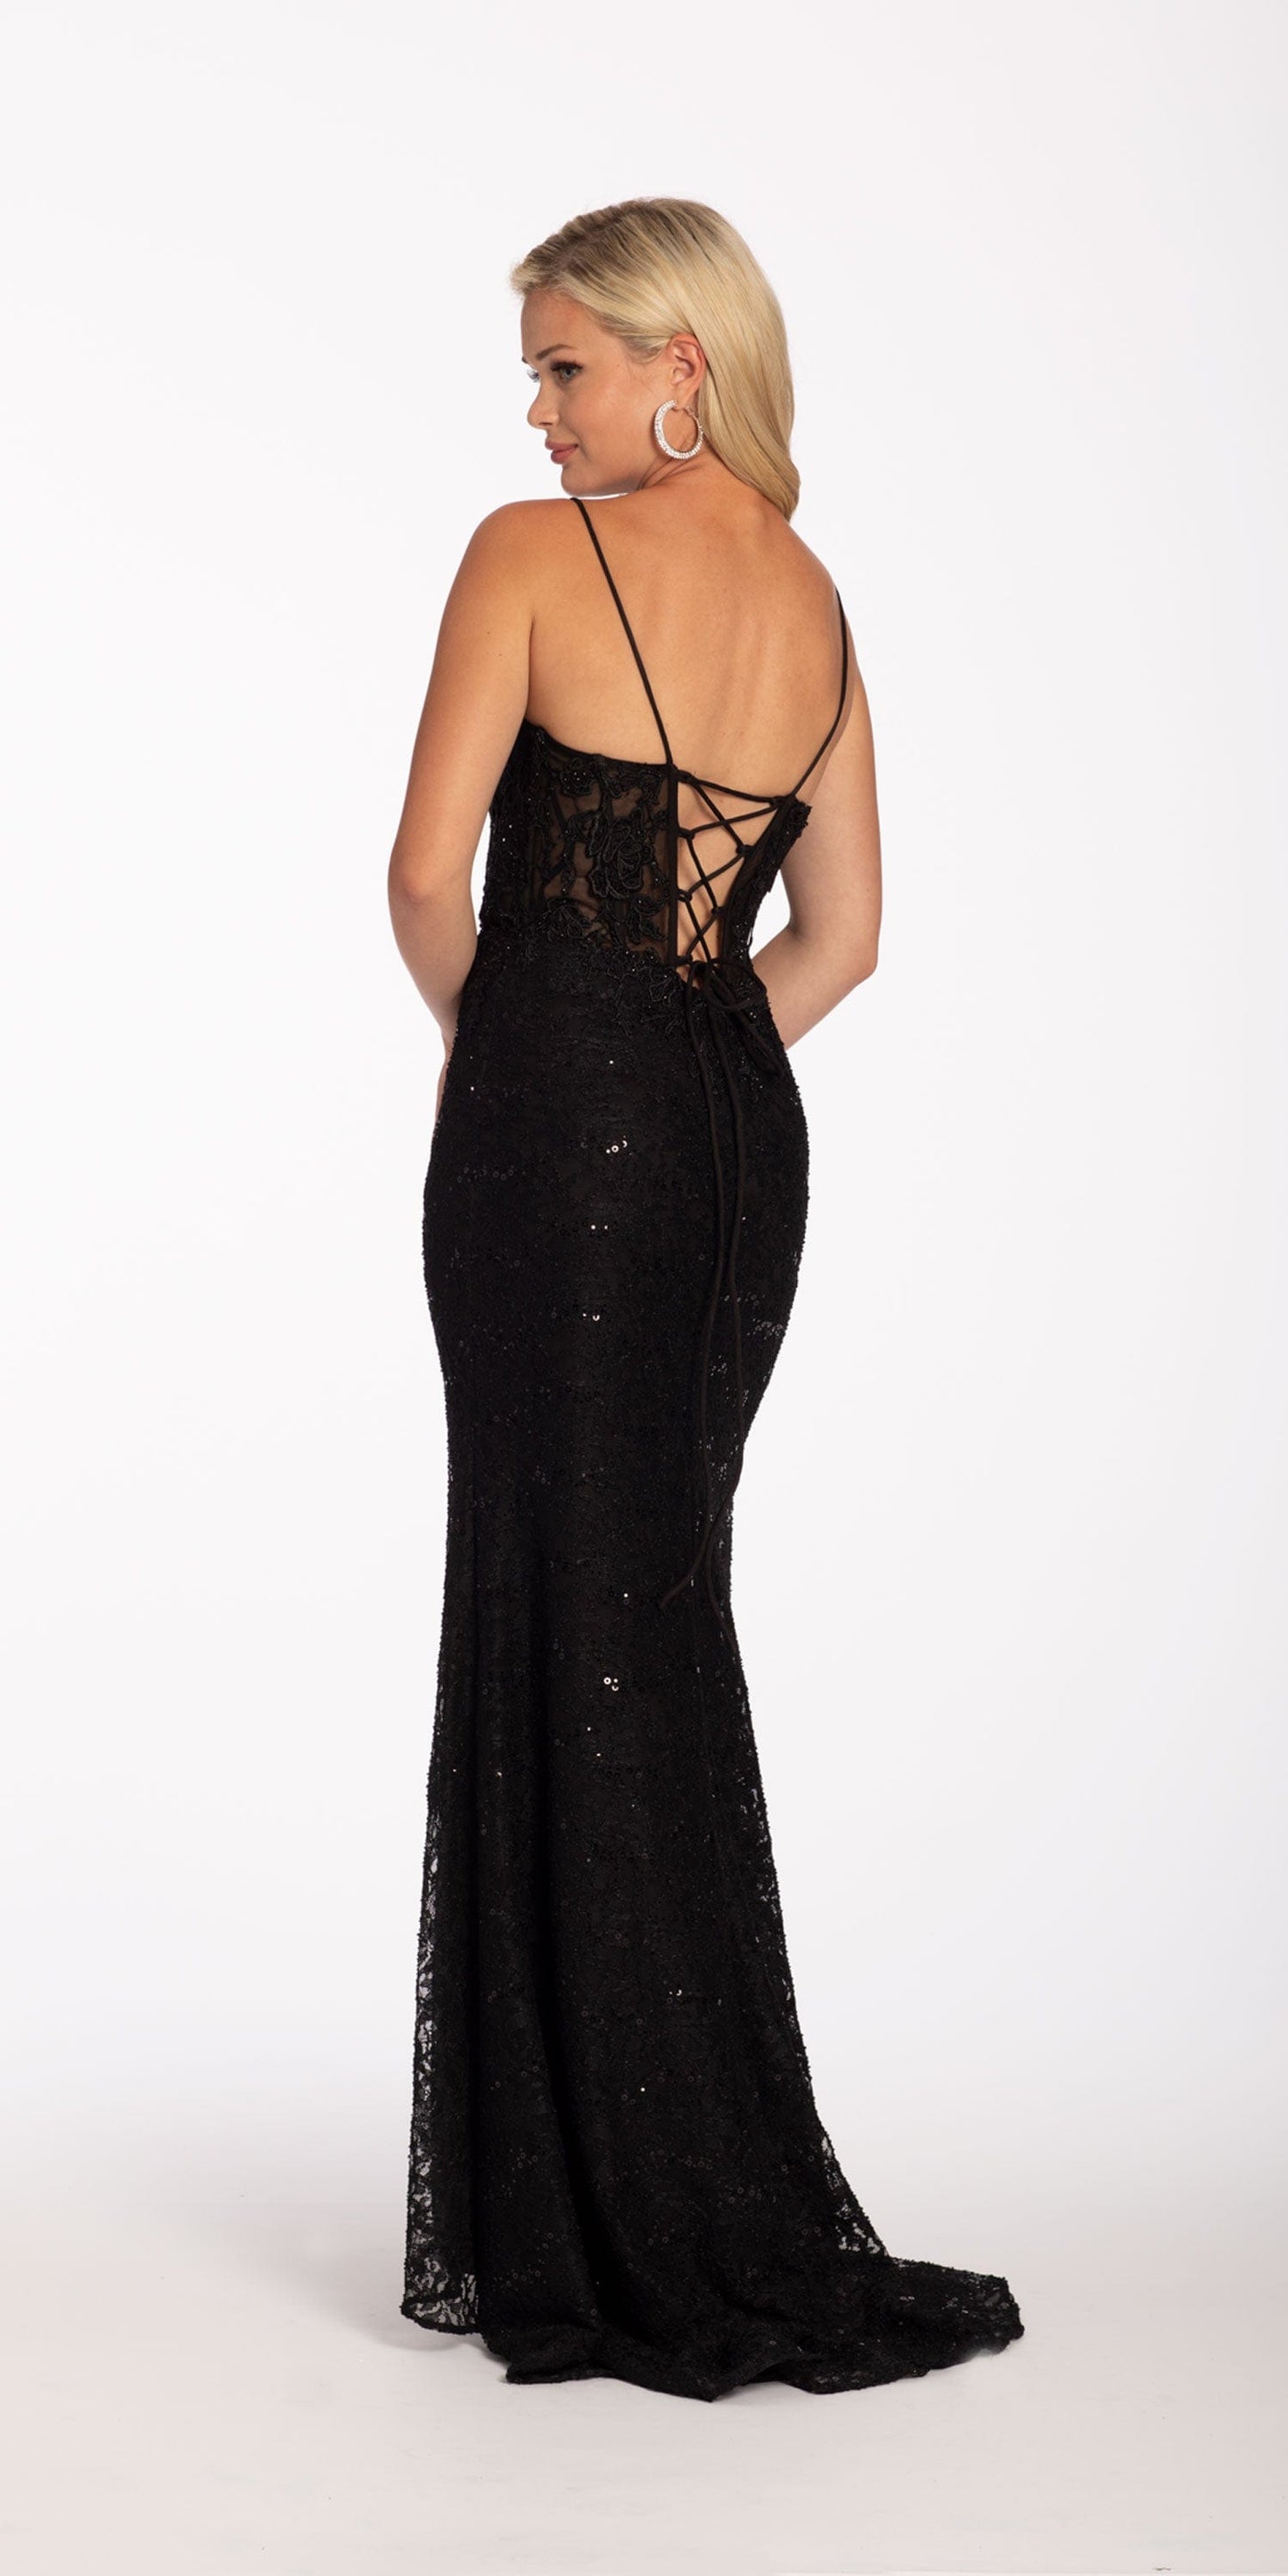 Camille La Vie Beaded Embroidered Corset Lace Up Back Dress with Side Slit